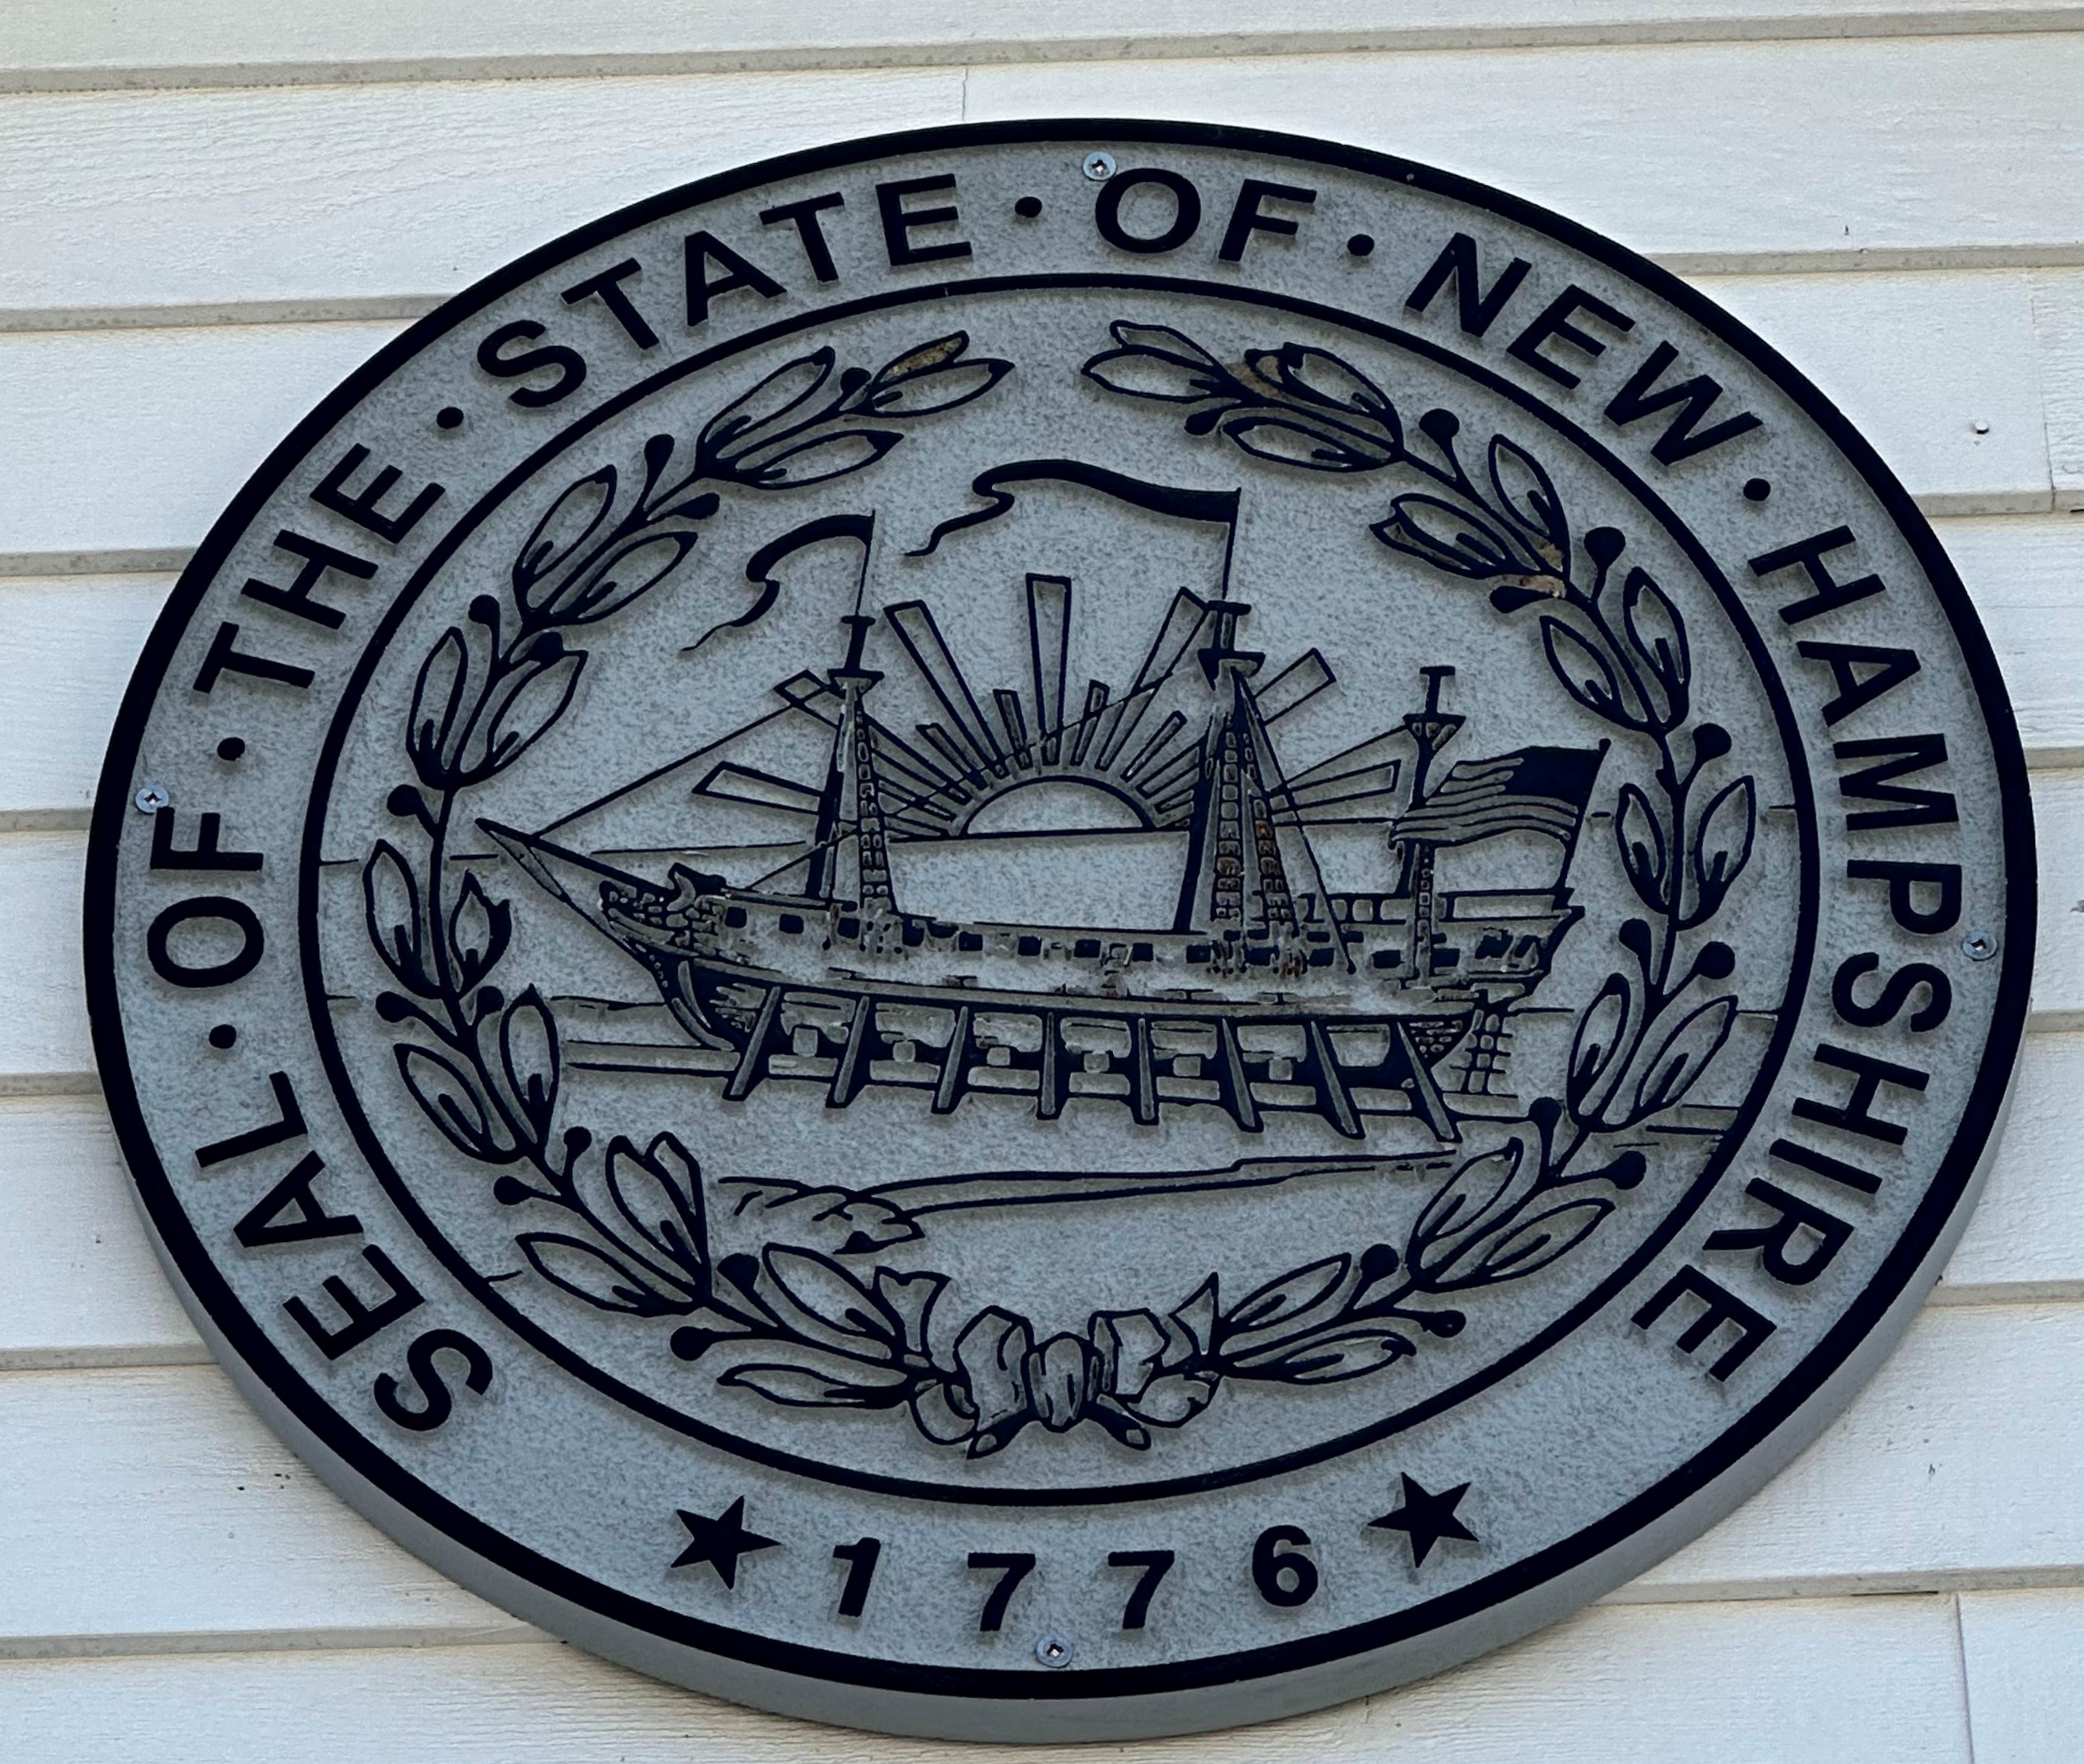 This is a photo of the seal of the state of New Hampshire, featured by personal injury lawyer Attorney Buckley. It is an oval grey plaque on a white wooden paneled wall. Words encircle a wreath that encircles an illustration of a sunrise behind a boat and an American flag. The words read: Seal of the State of New Hampshire, 1776, with a star on either side of the year.